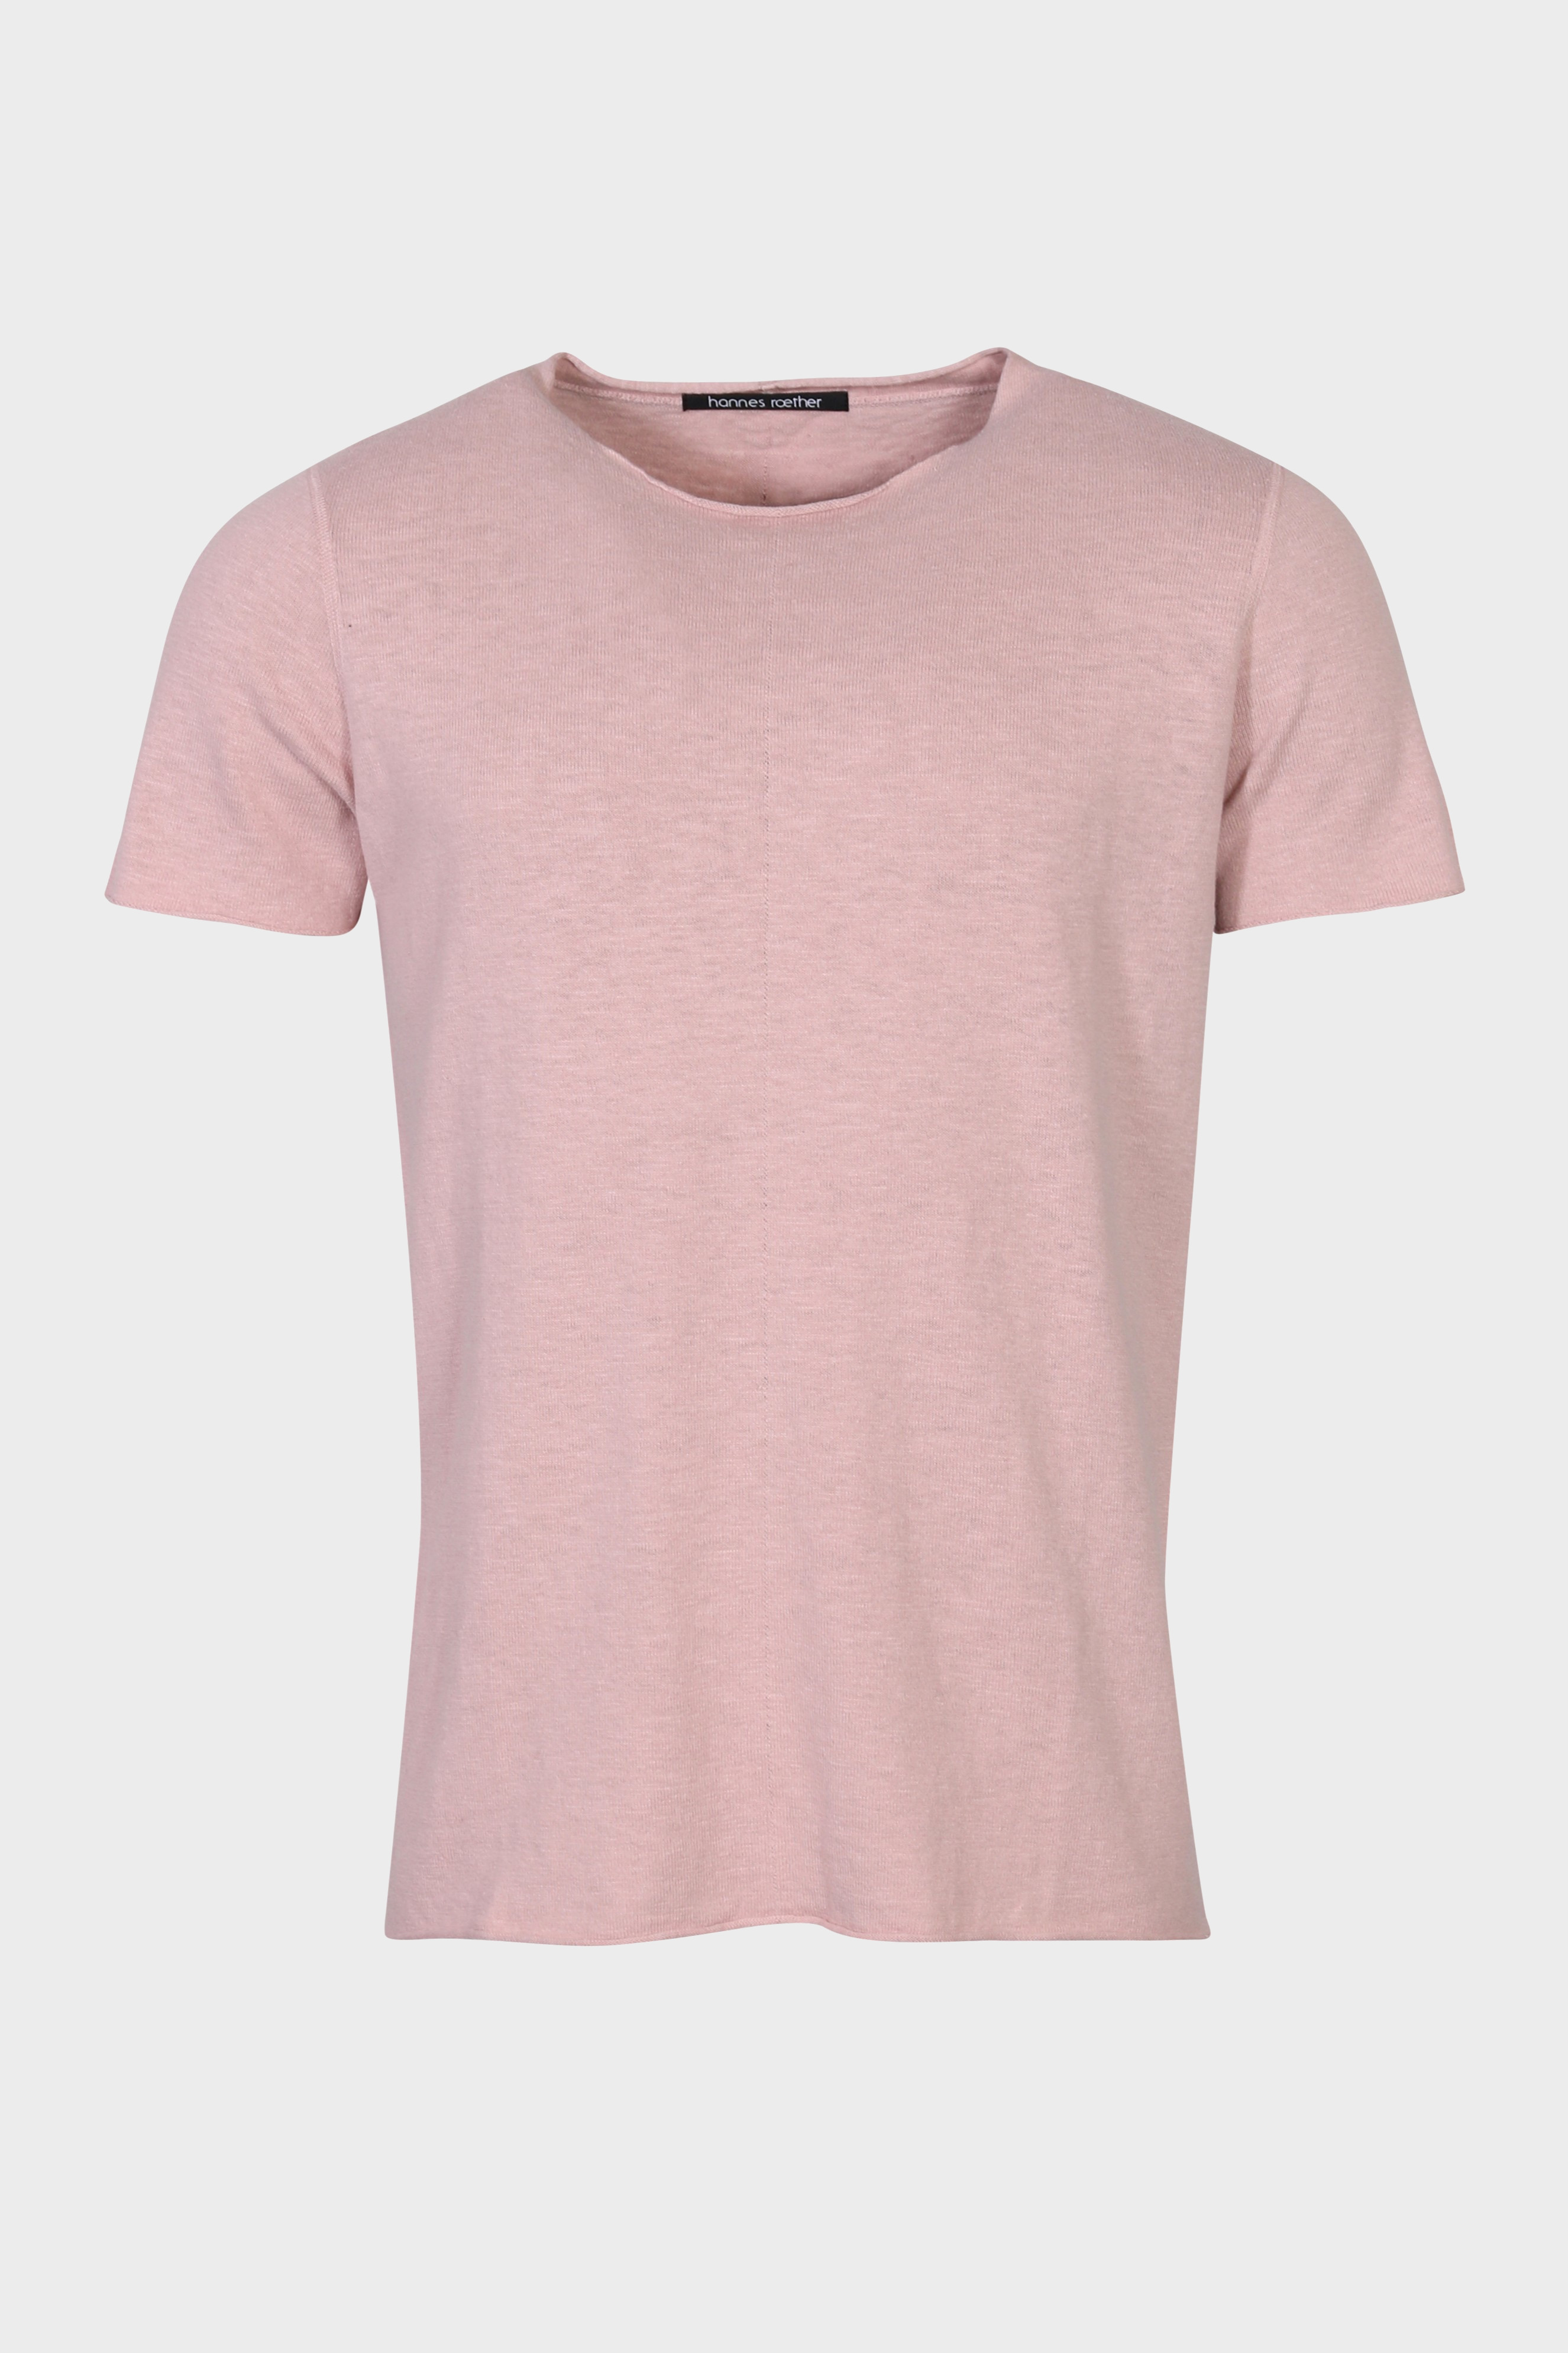 HANNES ROETHER Knit T-Shirt in Light Pink XL